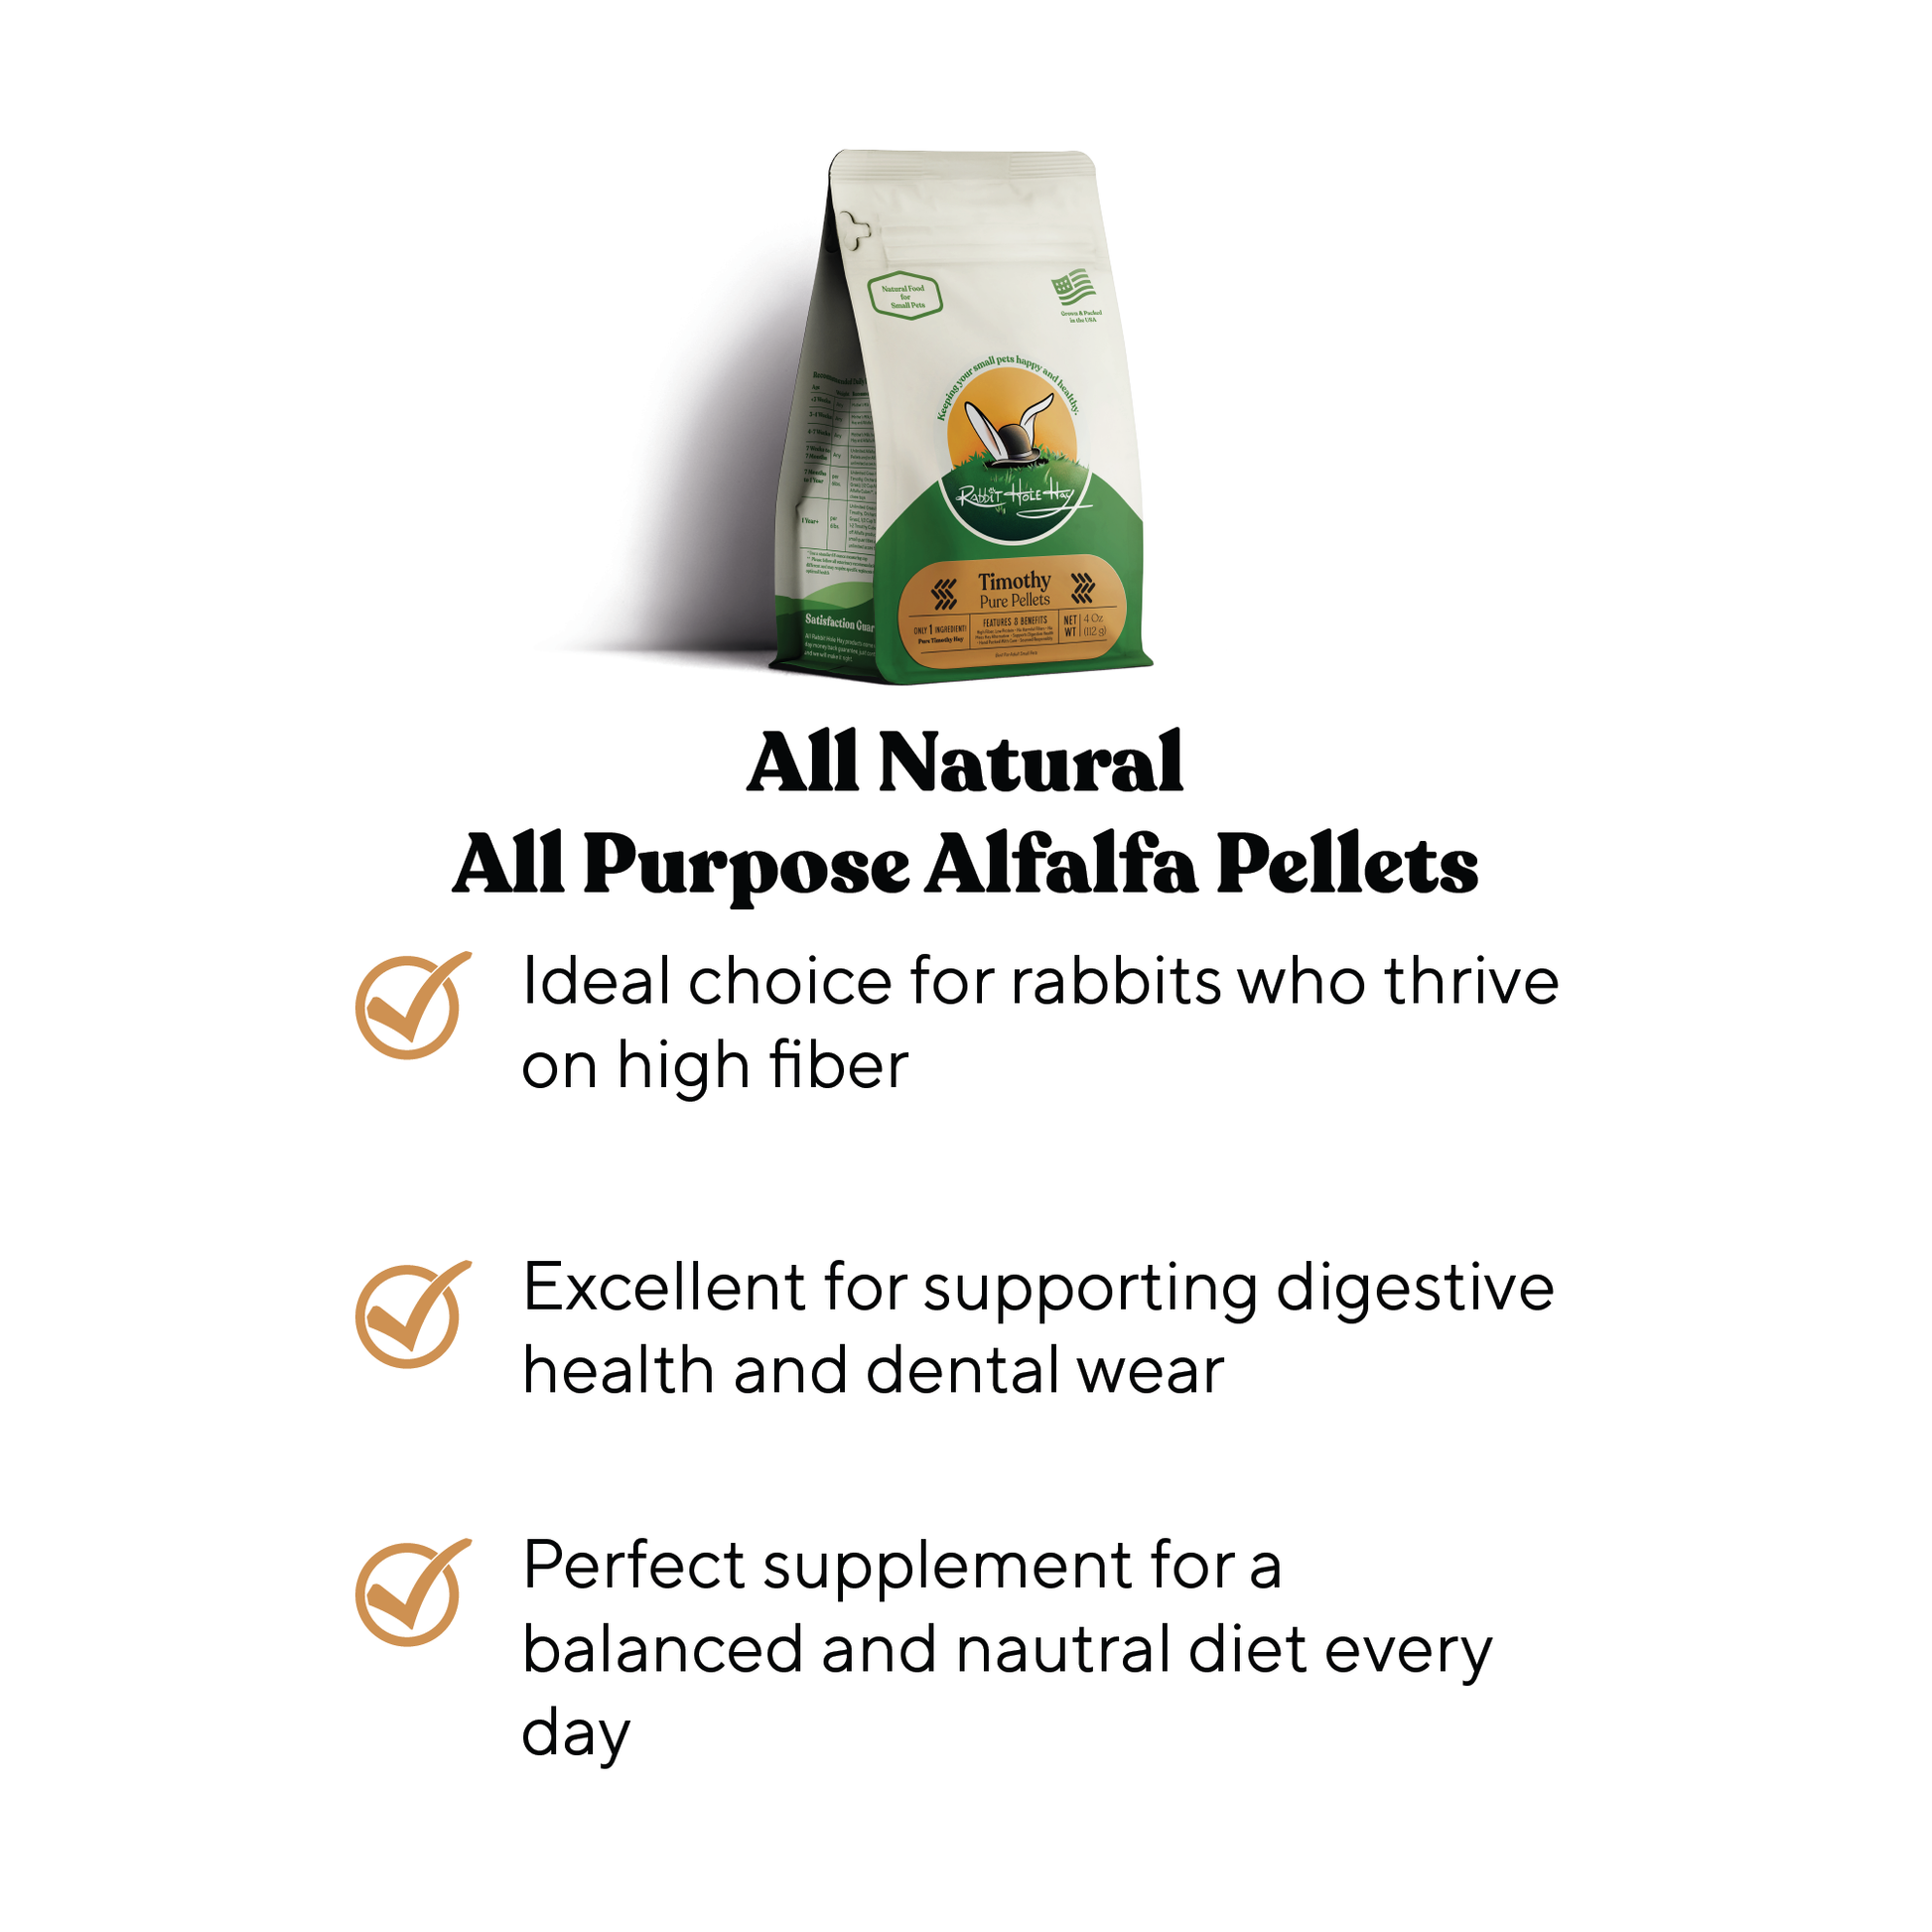 All Natural Pure Timothy Pellets - Benefits